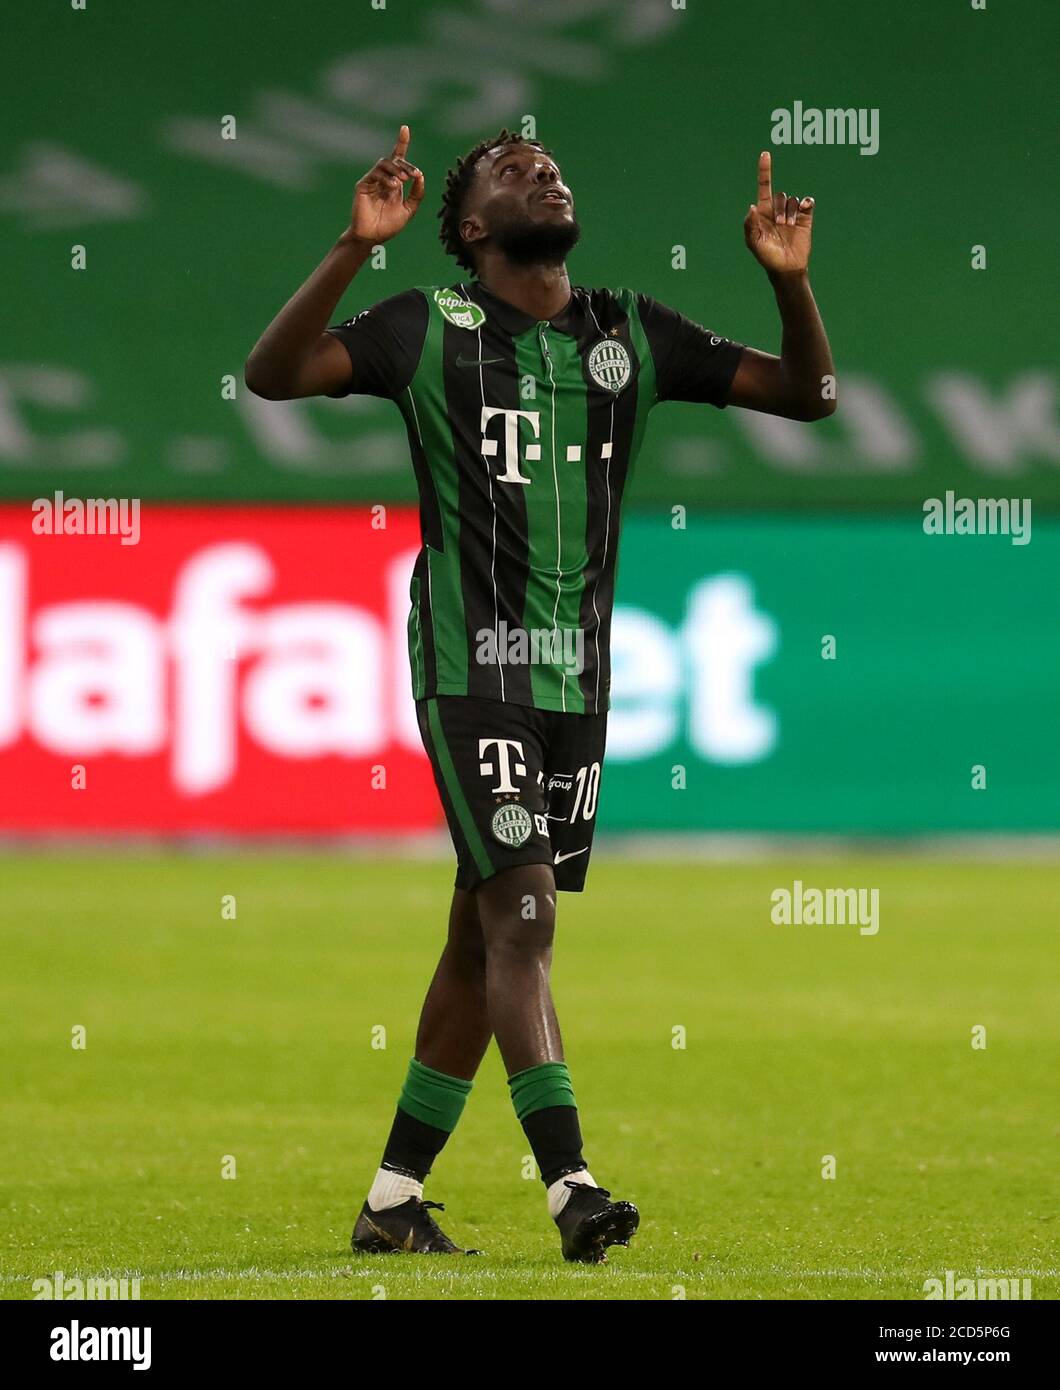 Sofascore - What a performance from Tokmac Nguen! 🔥 Left winger from  Norway was a key part as his Ferencvarosi TC won against Trabzonspor. 👏  The home-side managed to score 2️⃣ goals